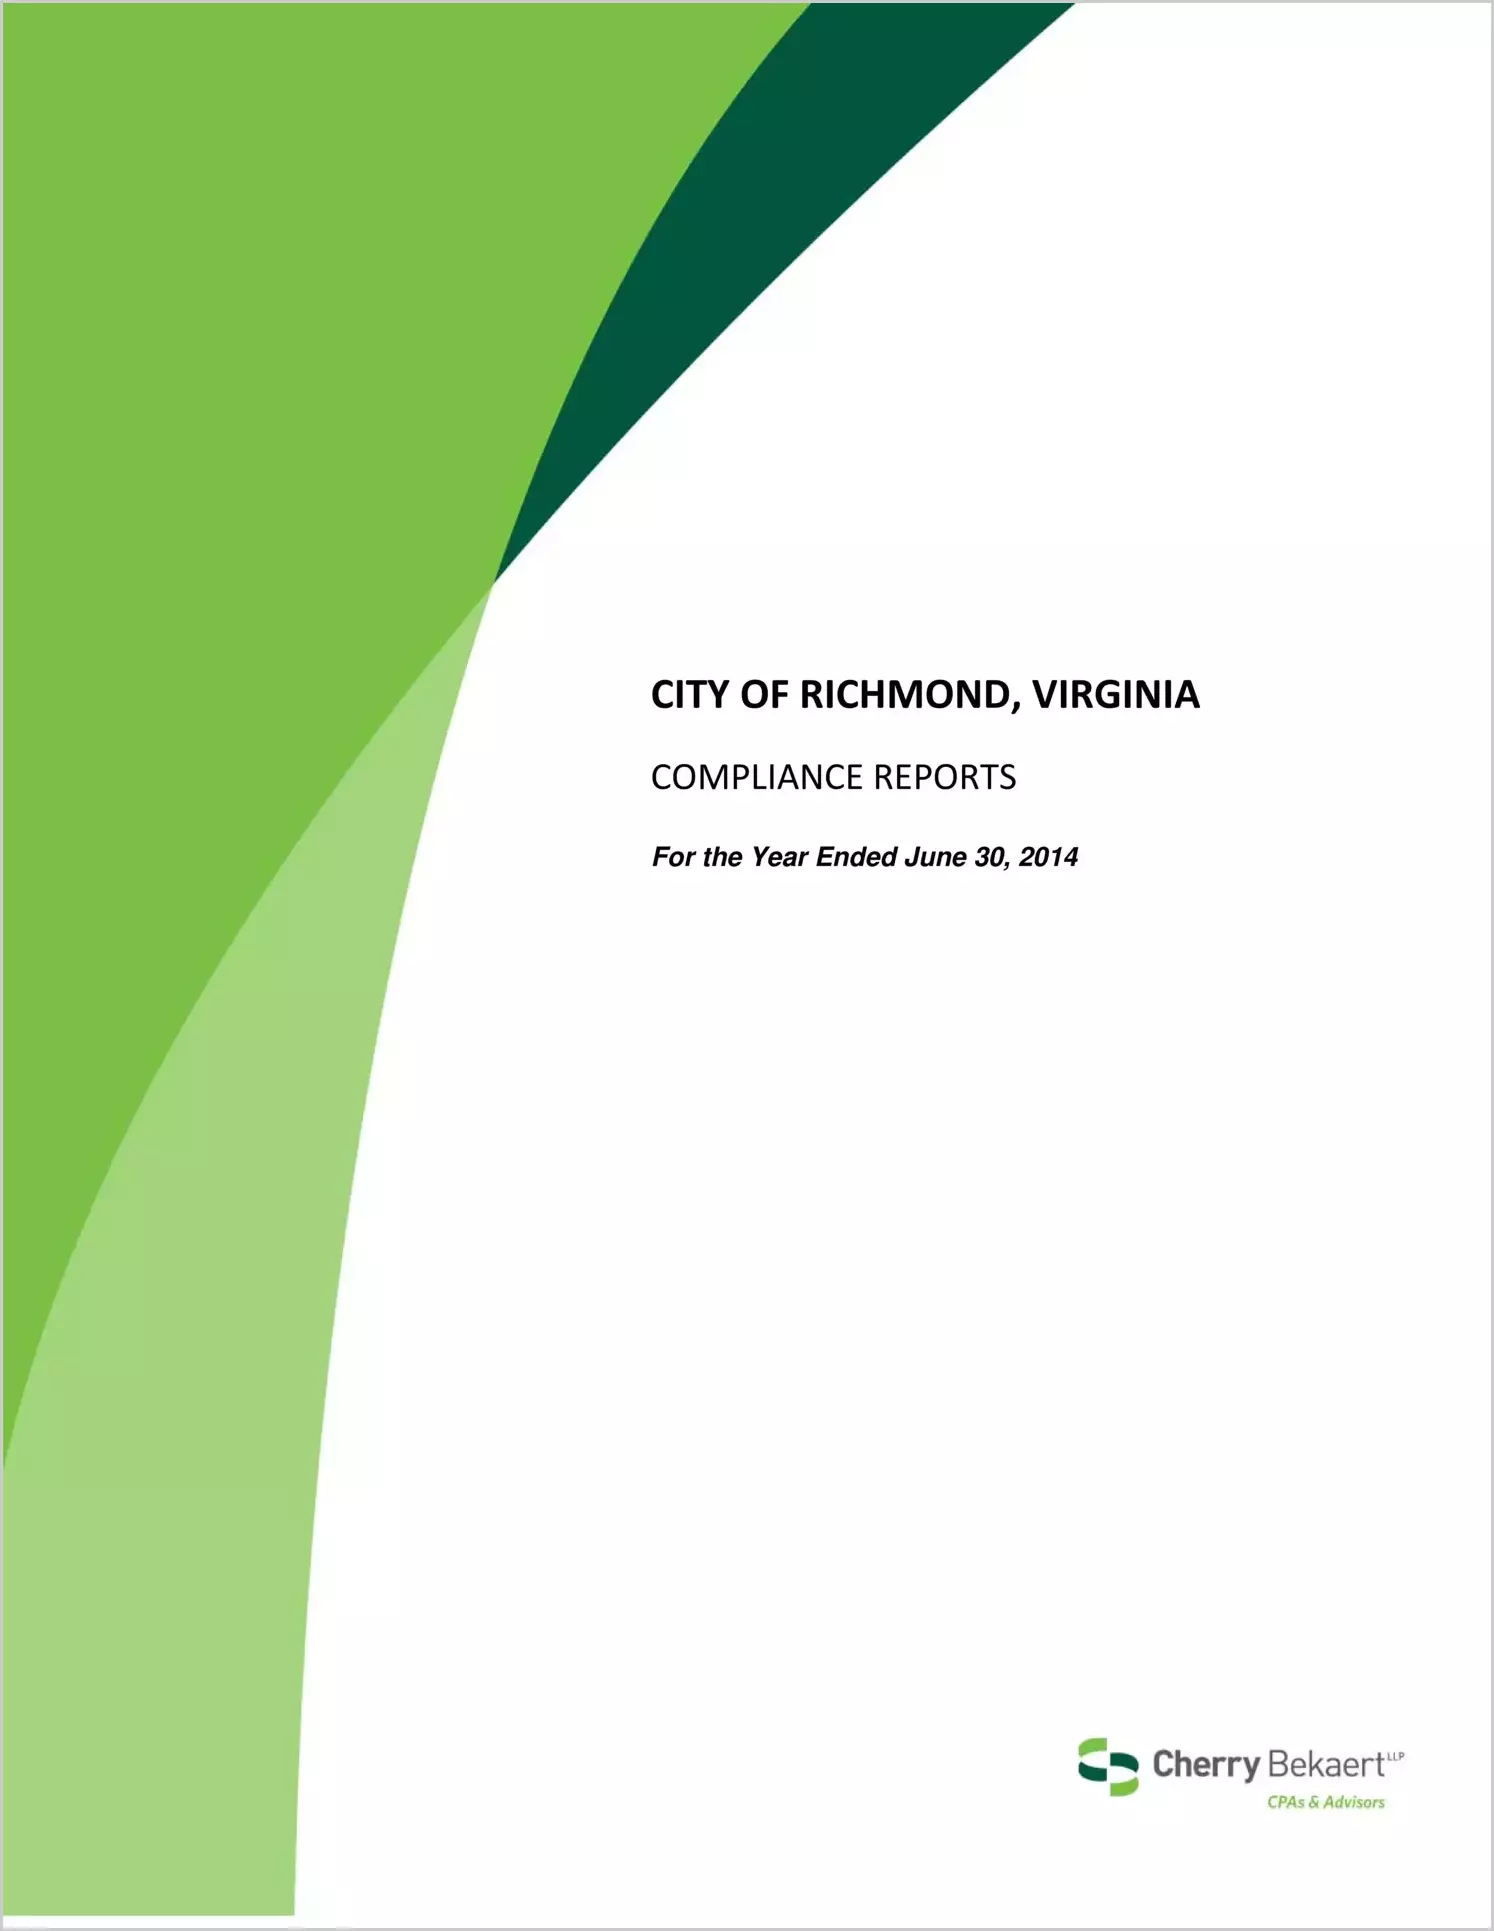 2014 Internal Control and Compliance Report for City of Richmond